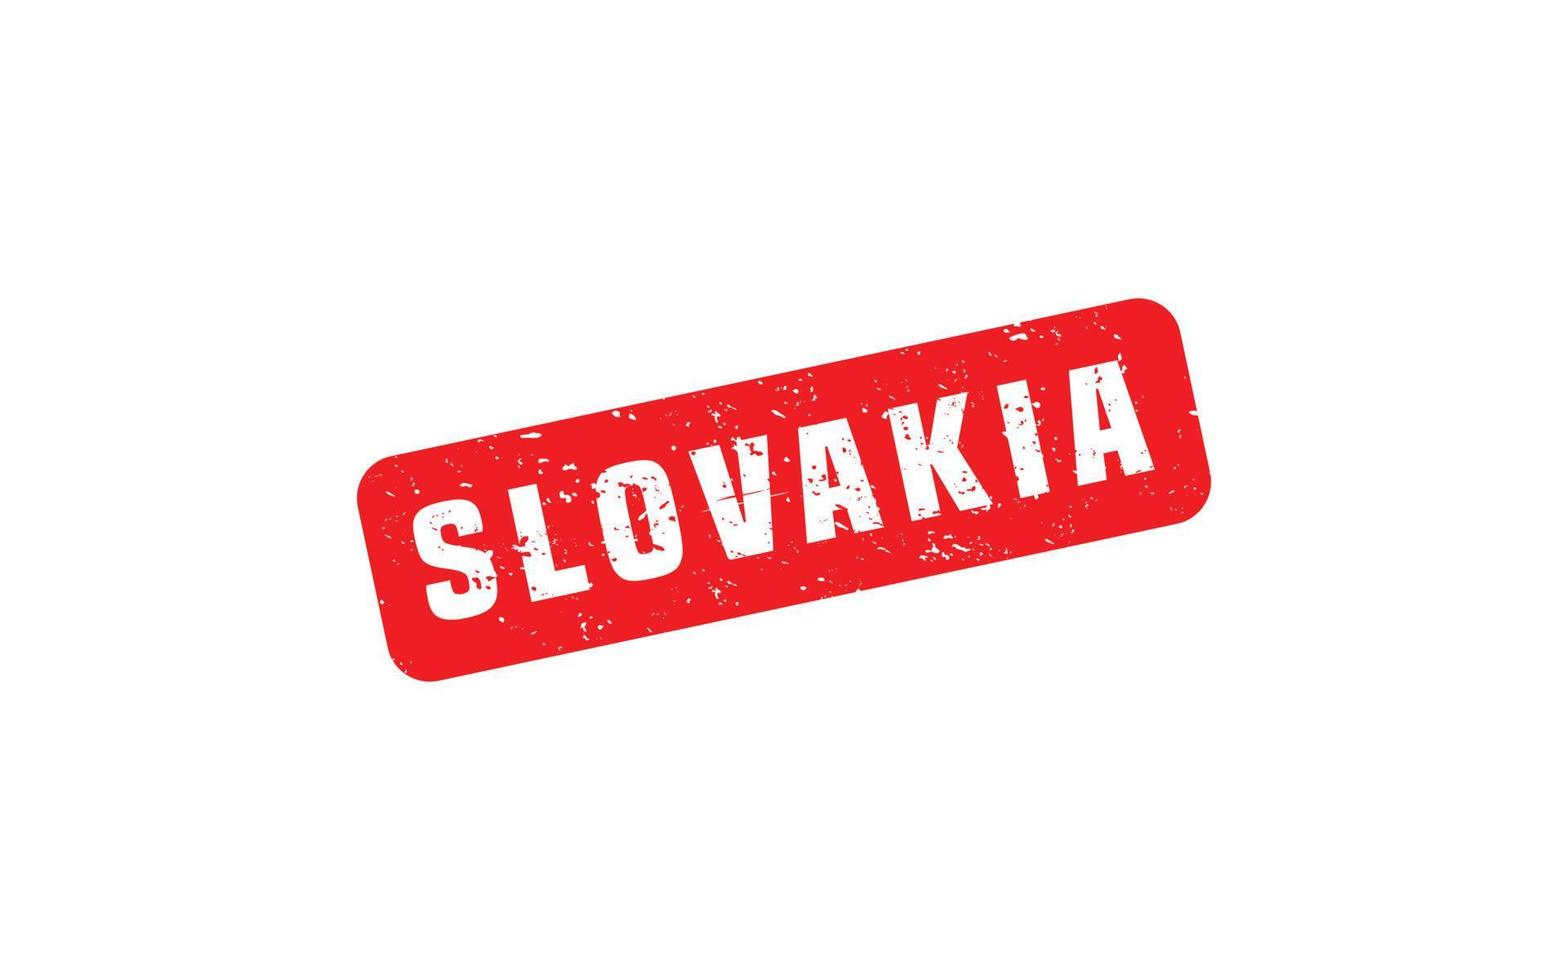 SLOVAKIA stamp rubber with grunge style on white background vector